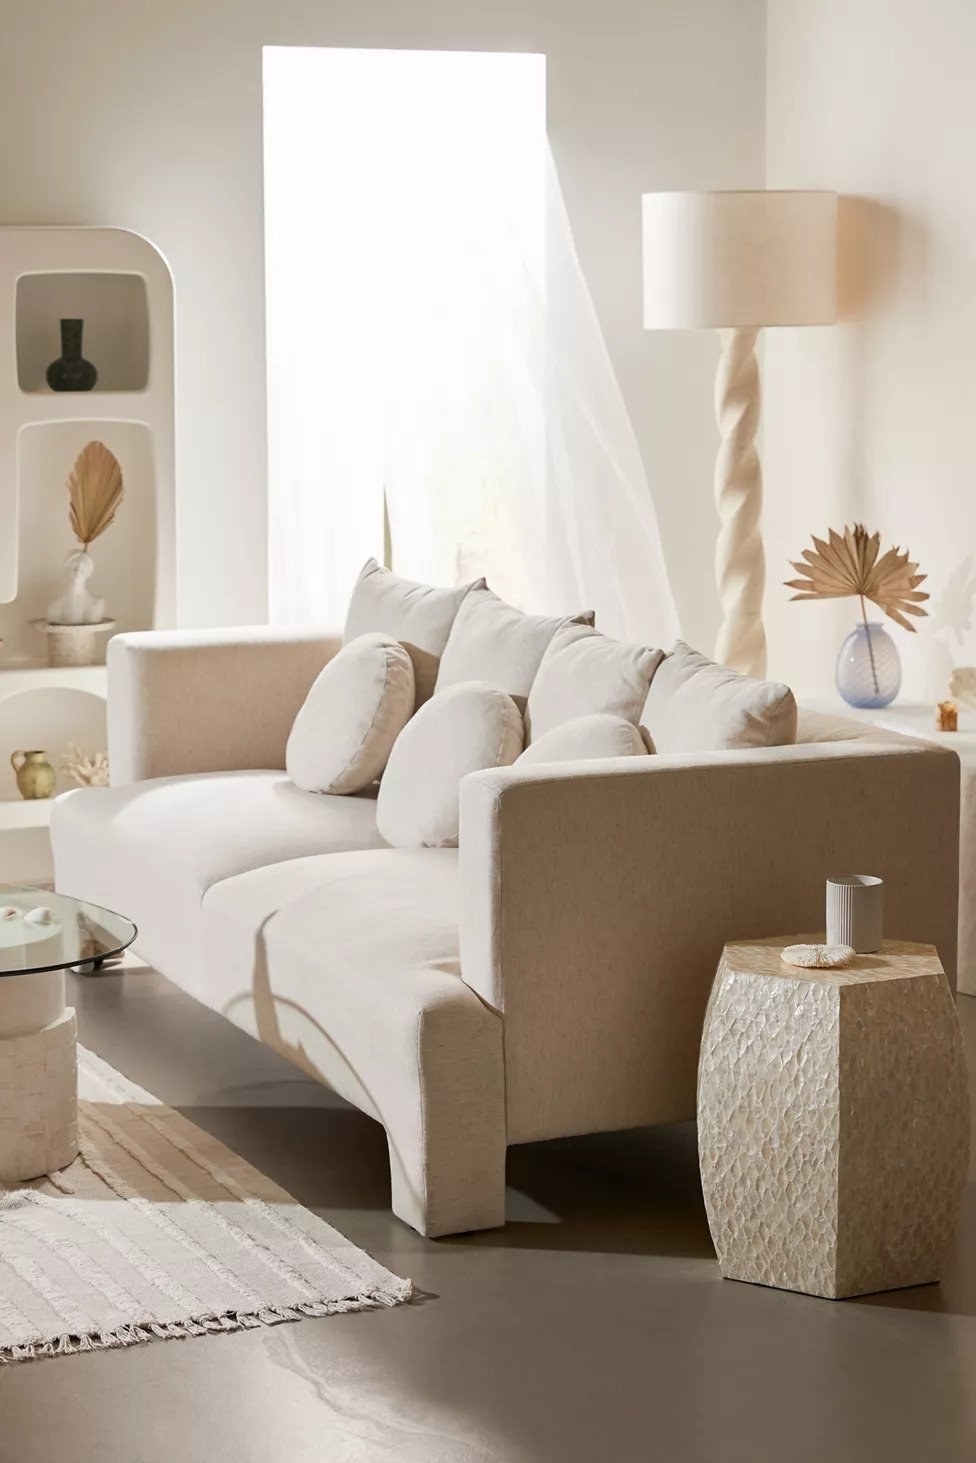 chunky sofa in room white white and beige decor